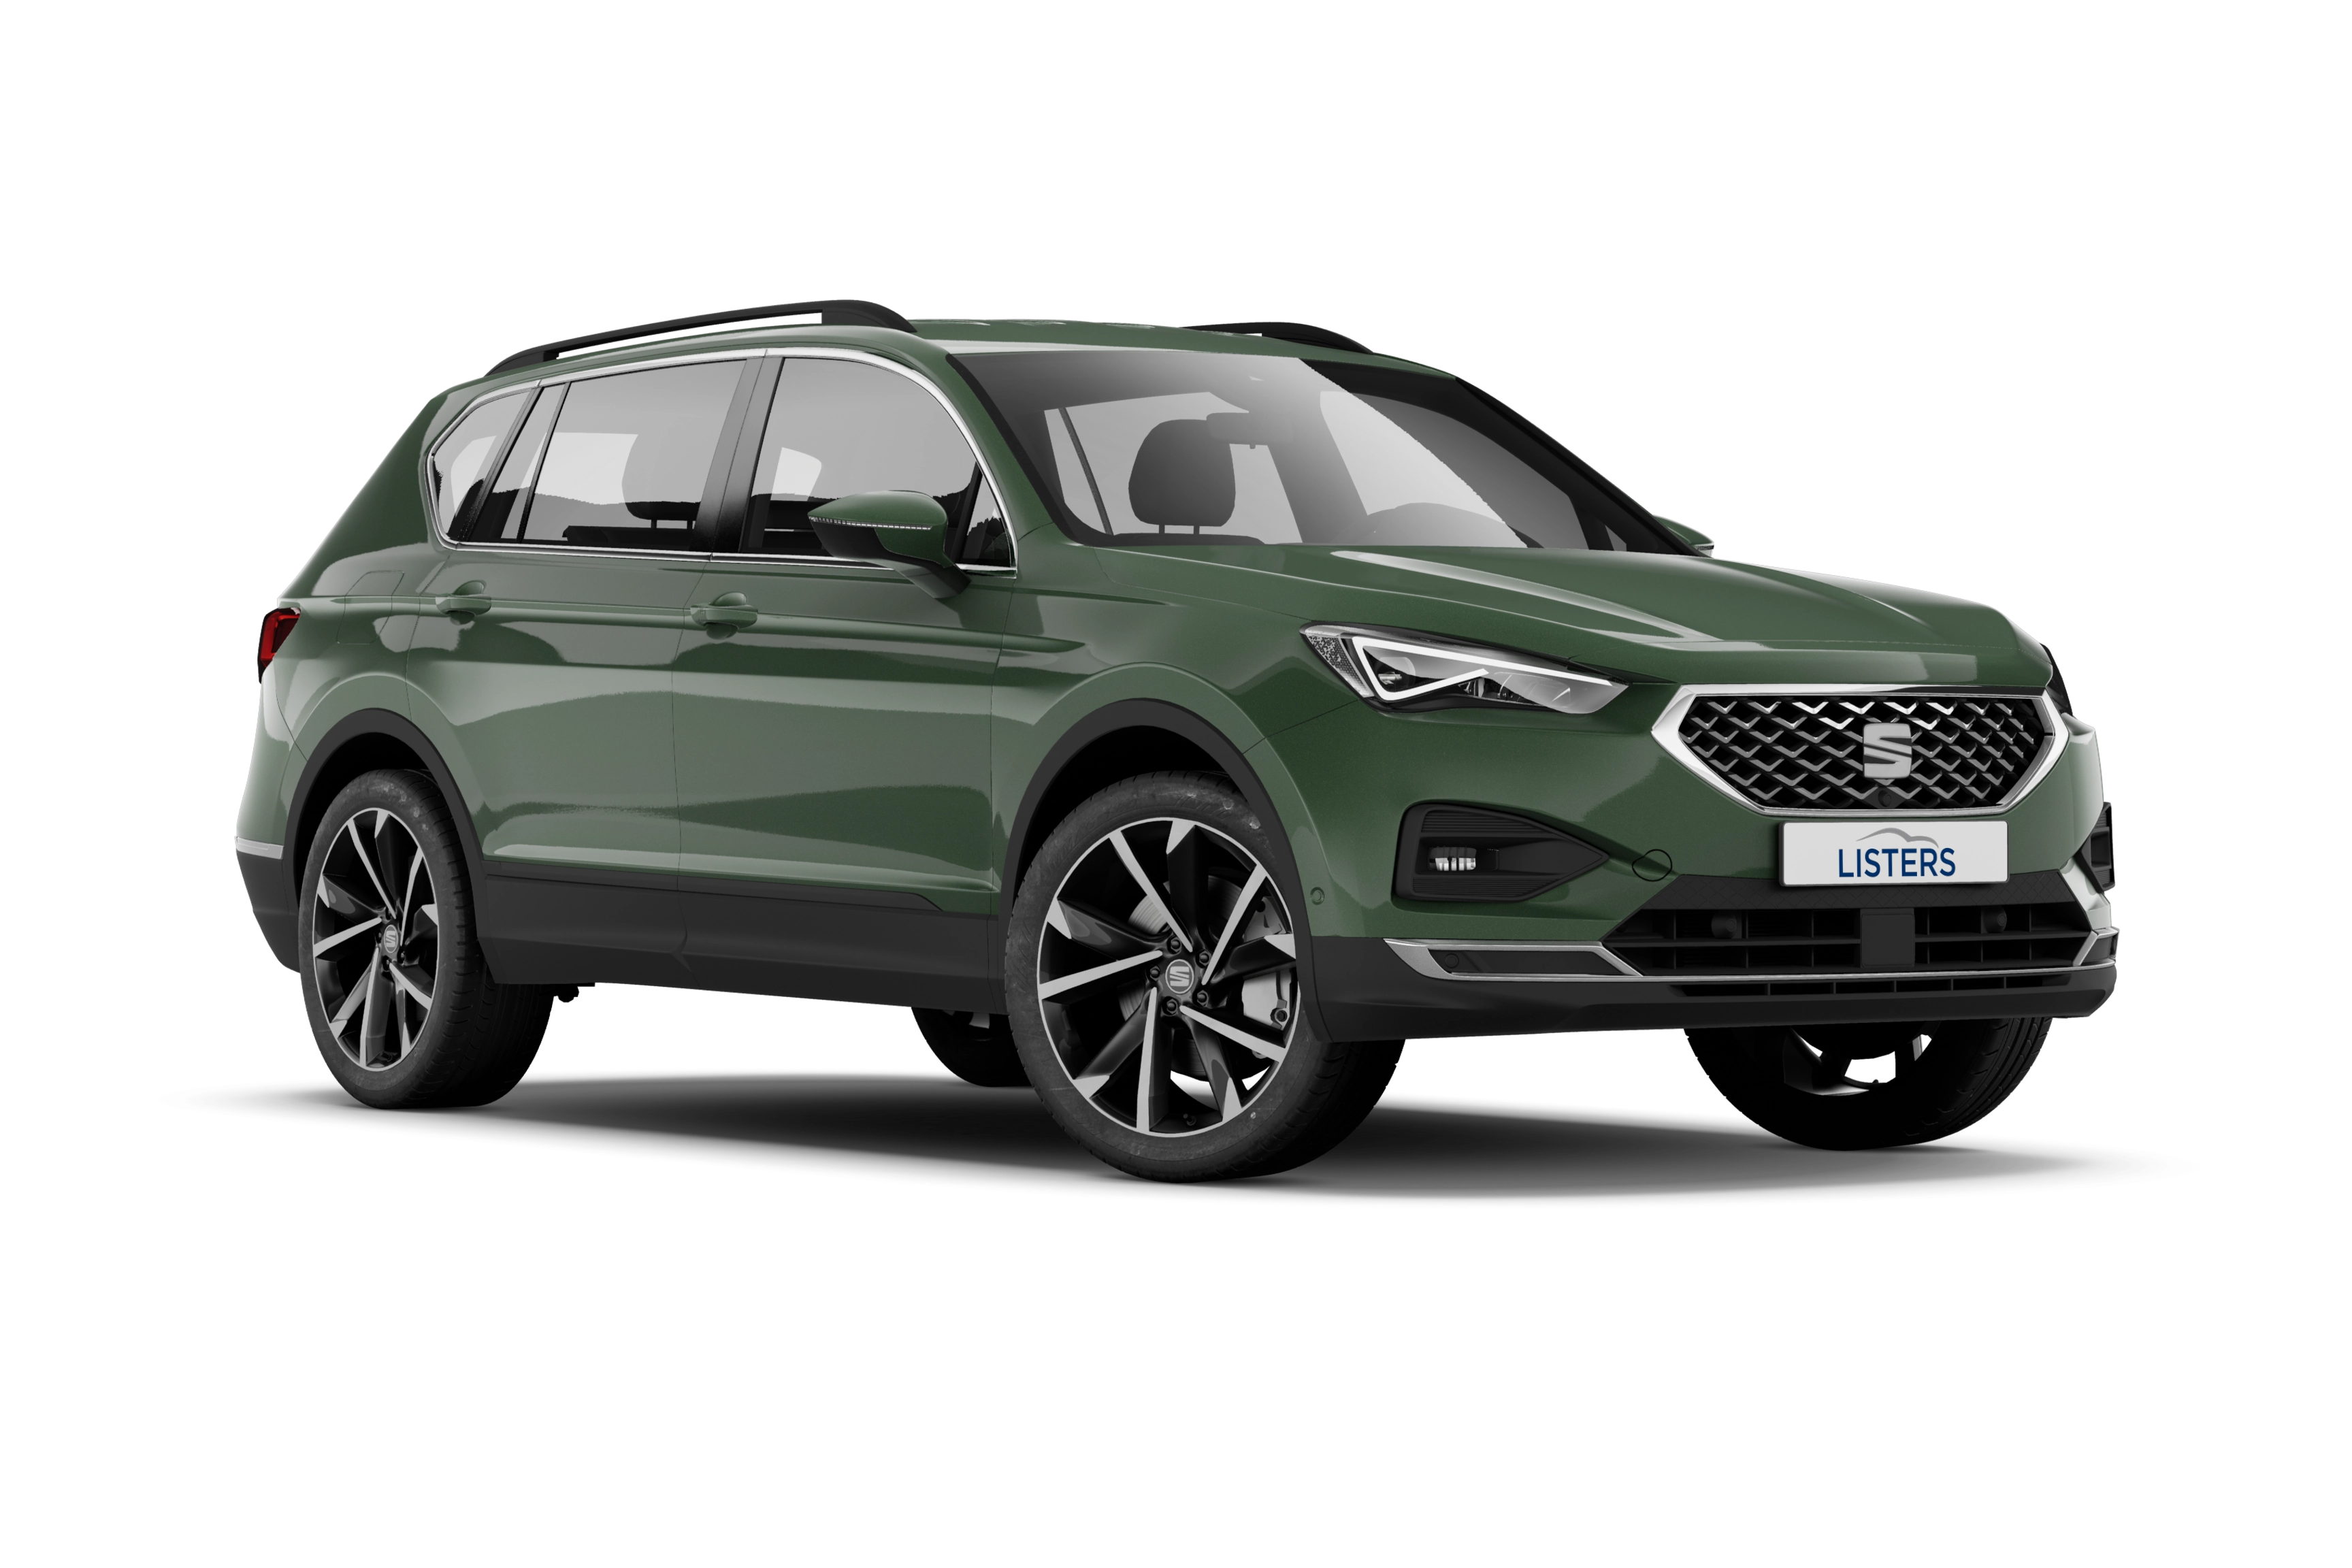 SEAT Tarraco Contract Hire & Leasing Offers